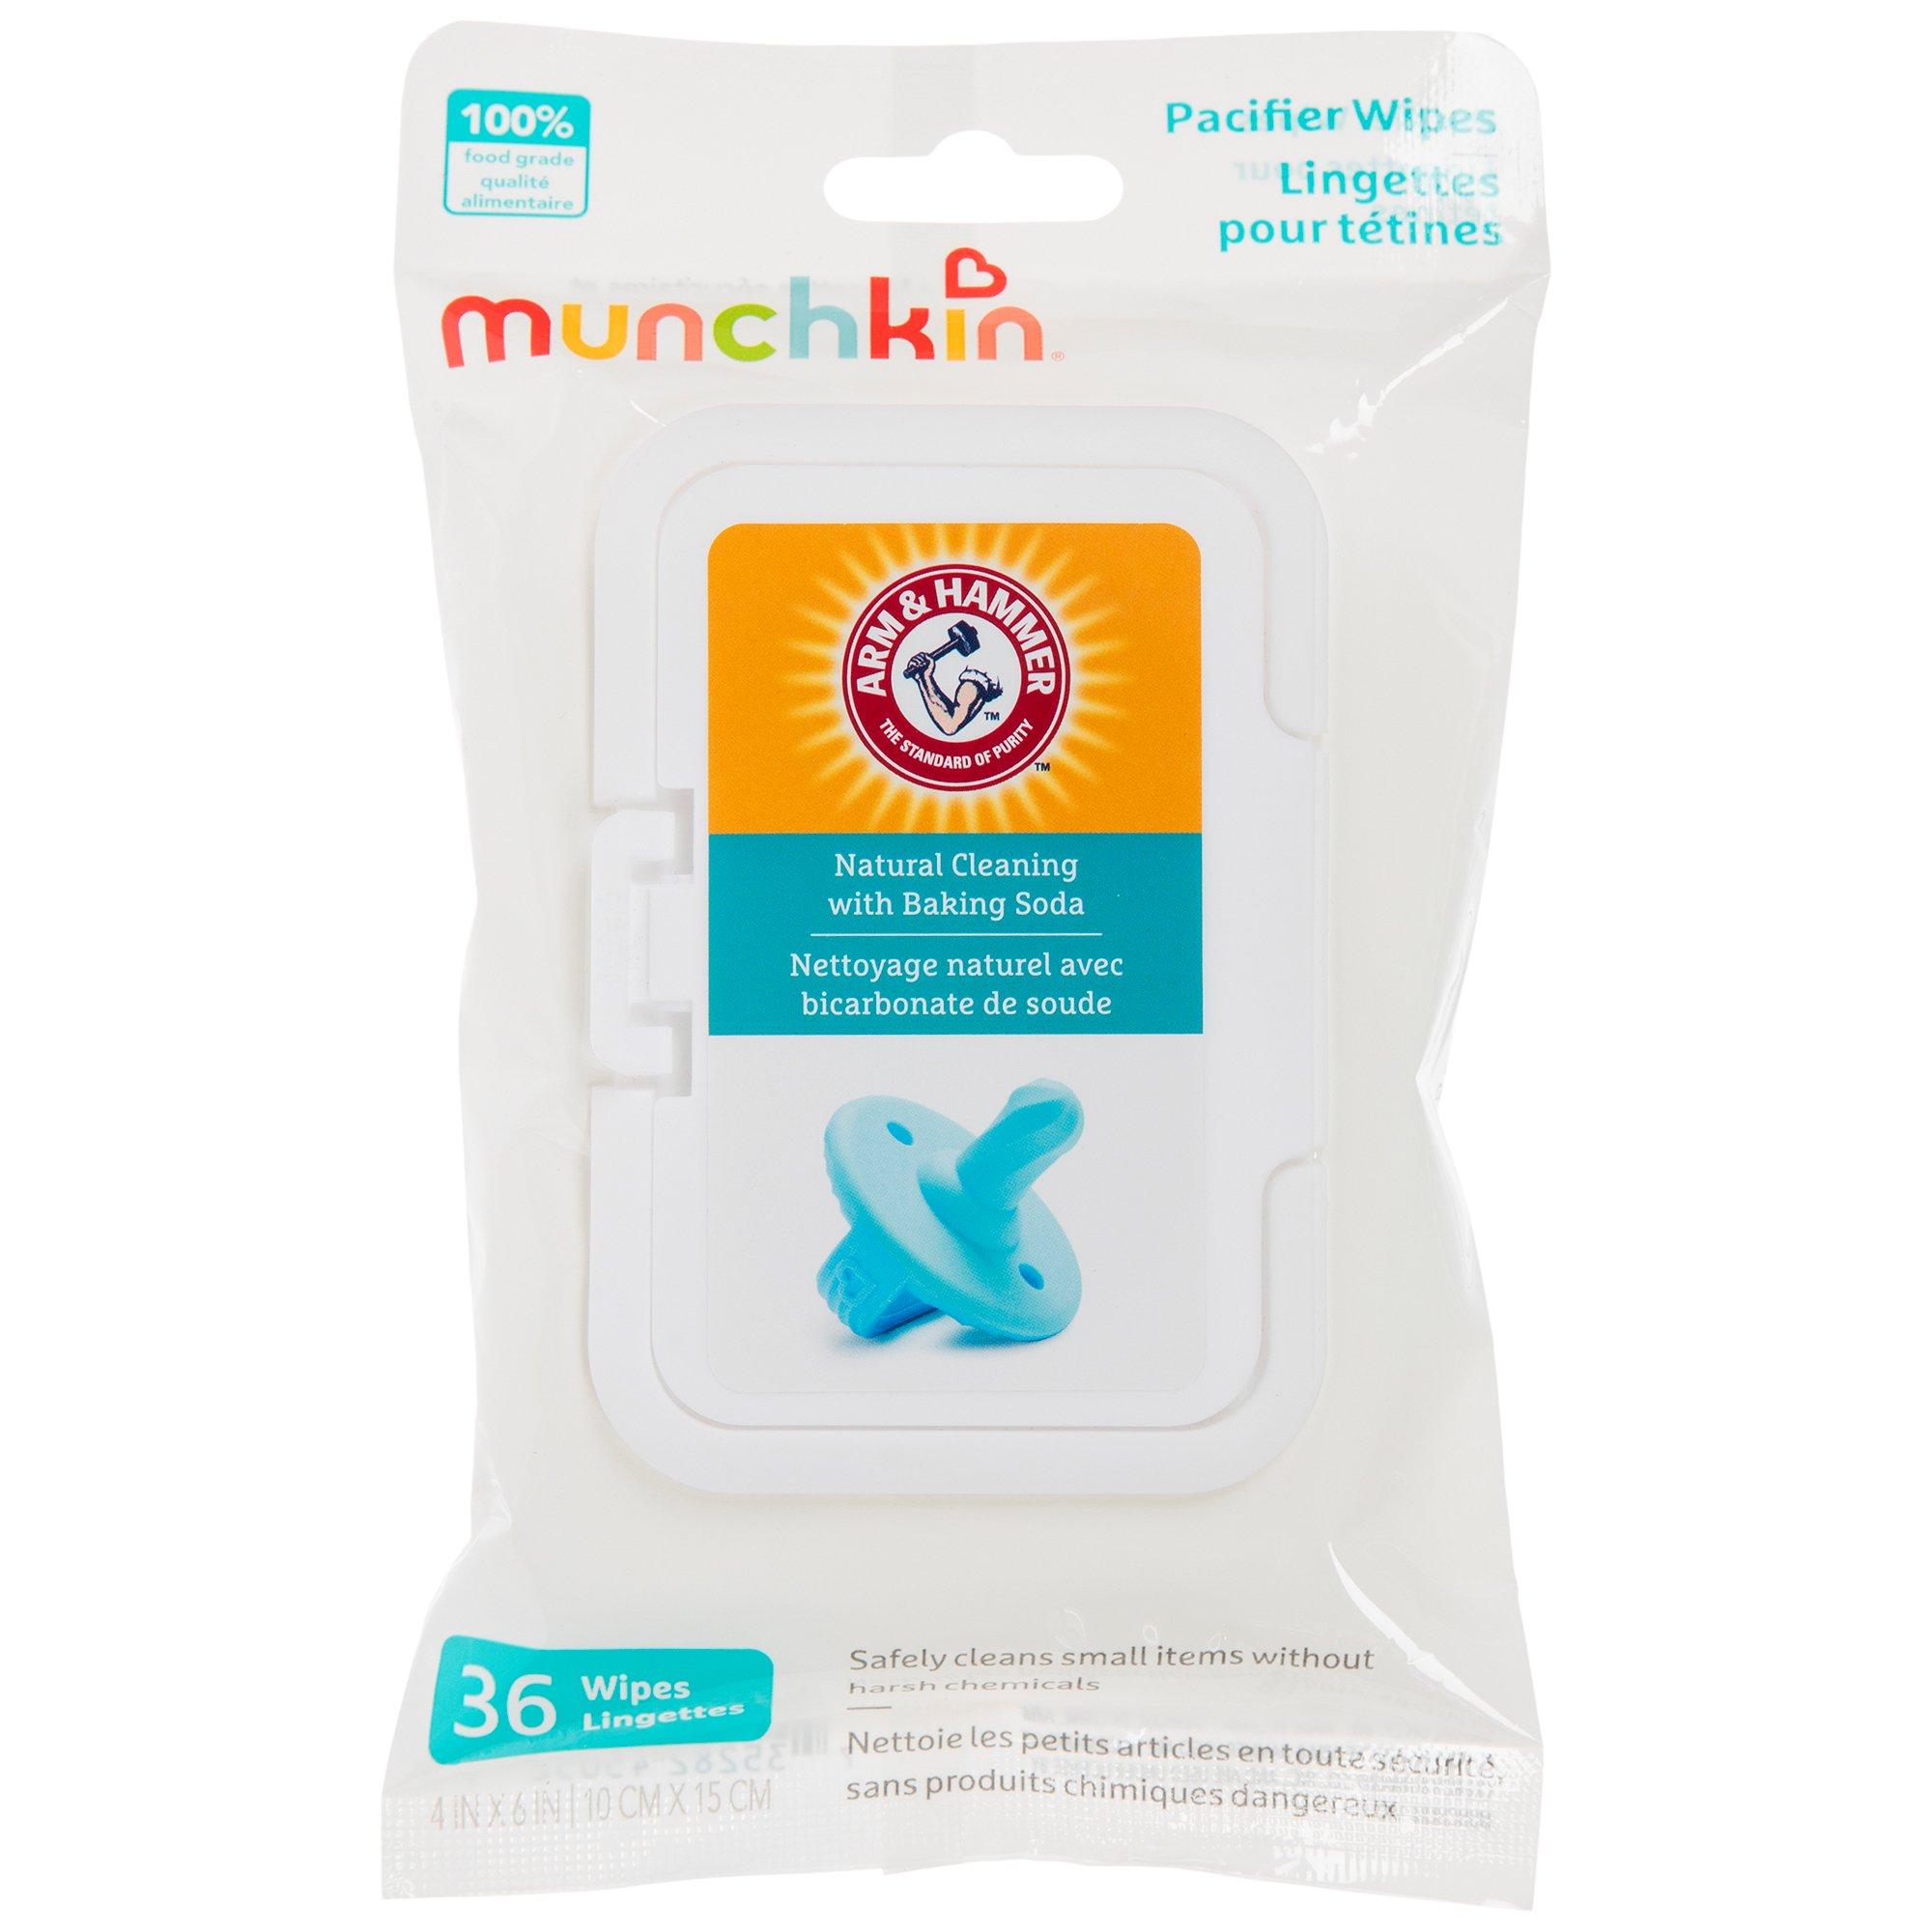 Munchkin Arm & Hammer Pacifier Wipes, 1 Pack, 36 Wipes 